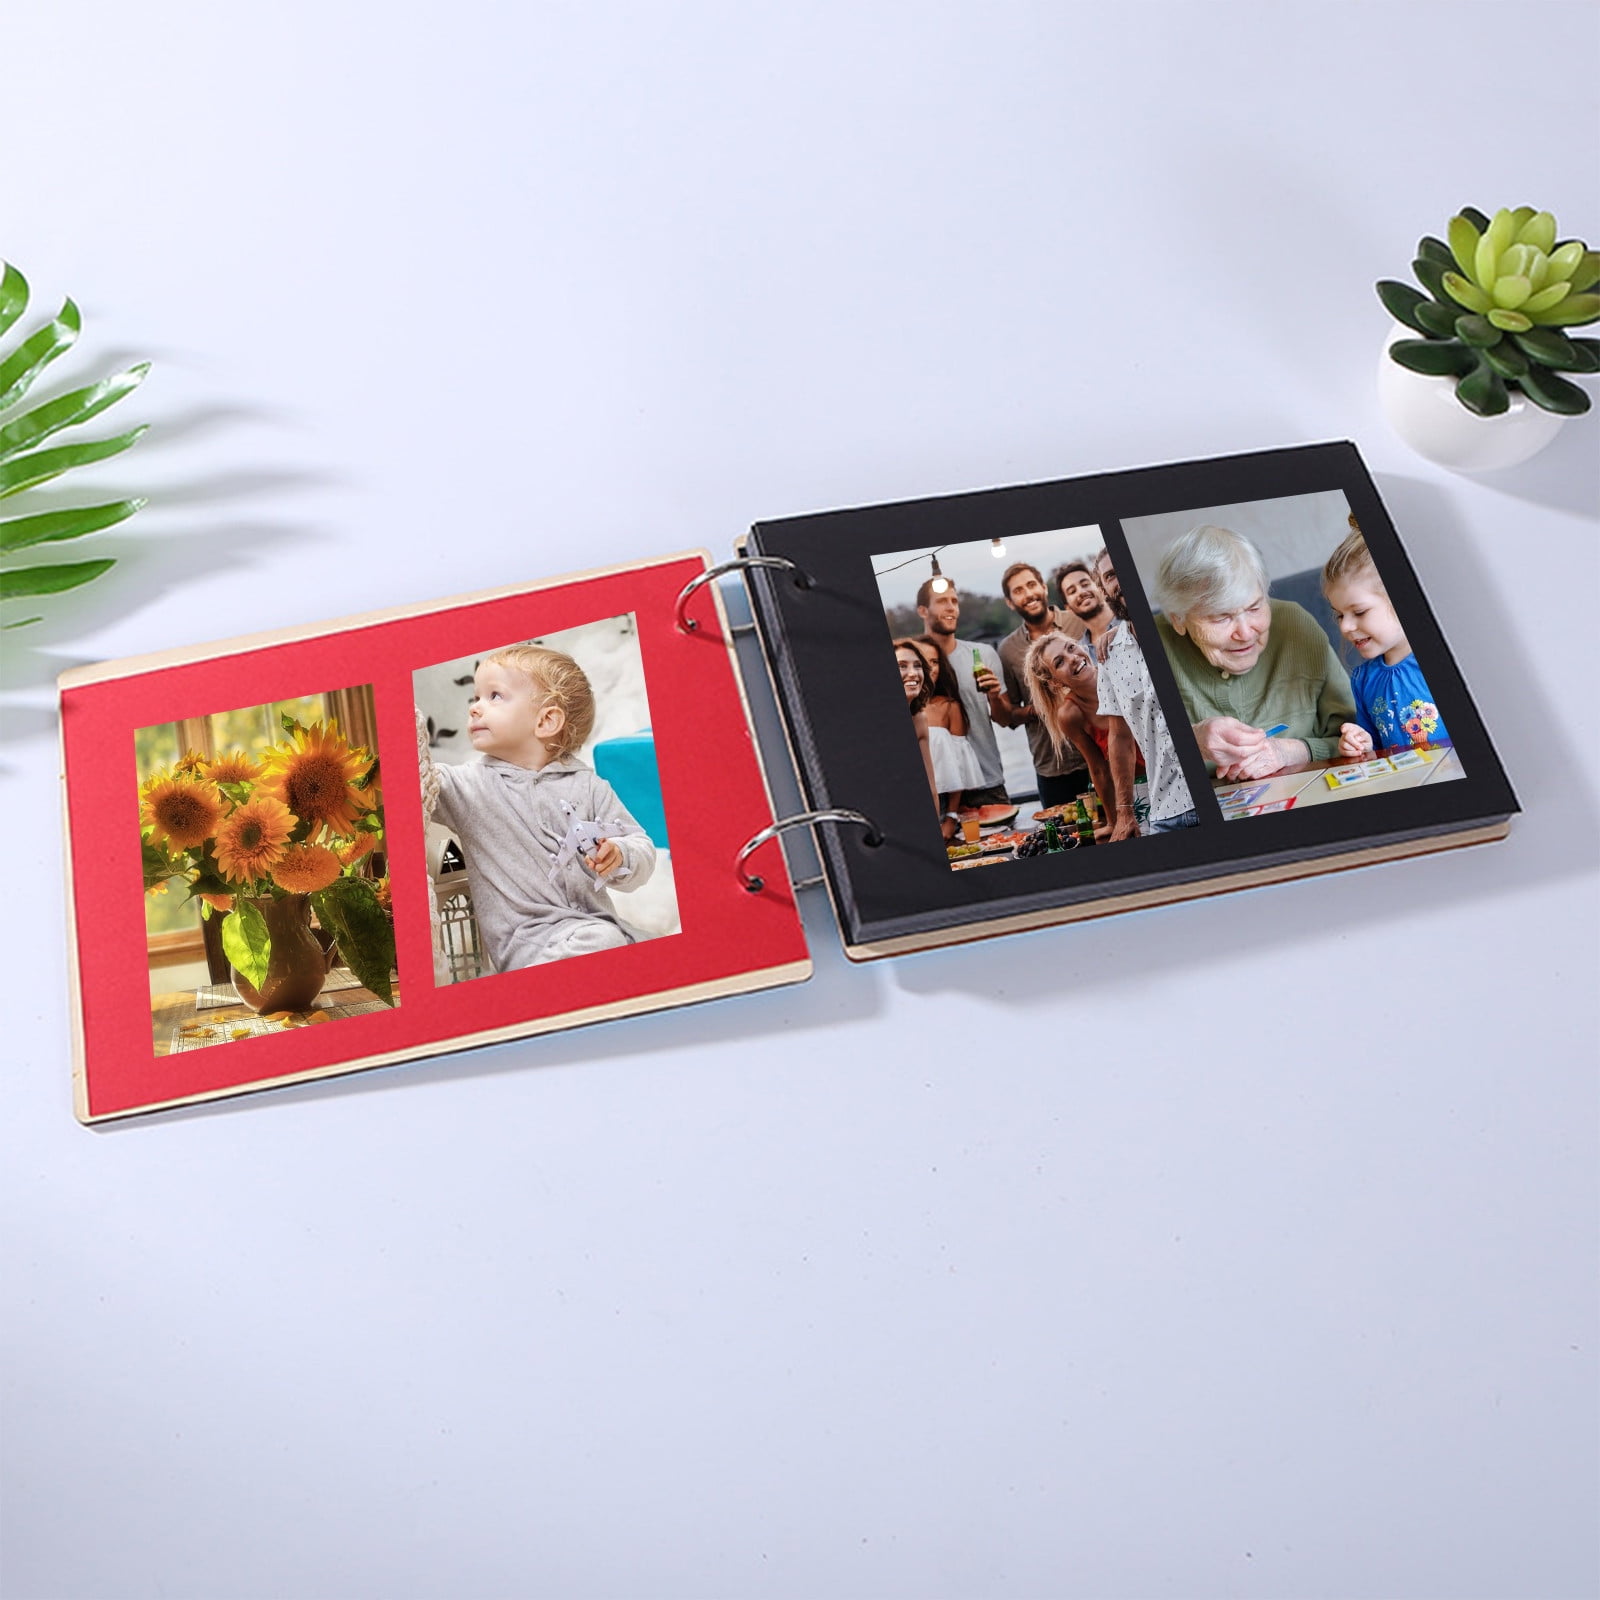 Photo Album For Photo Booth 2x6 Photos - For Wedding or Party Pictures -  Holds 120 Photobooth 2x6 Photo Strips - Slide In - Sweet Sixteen 